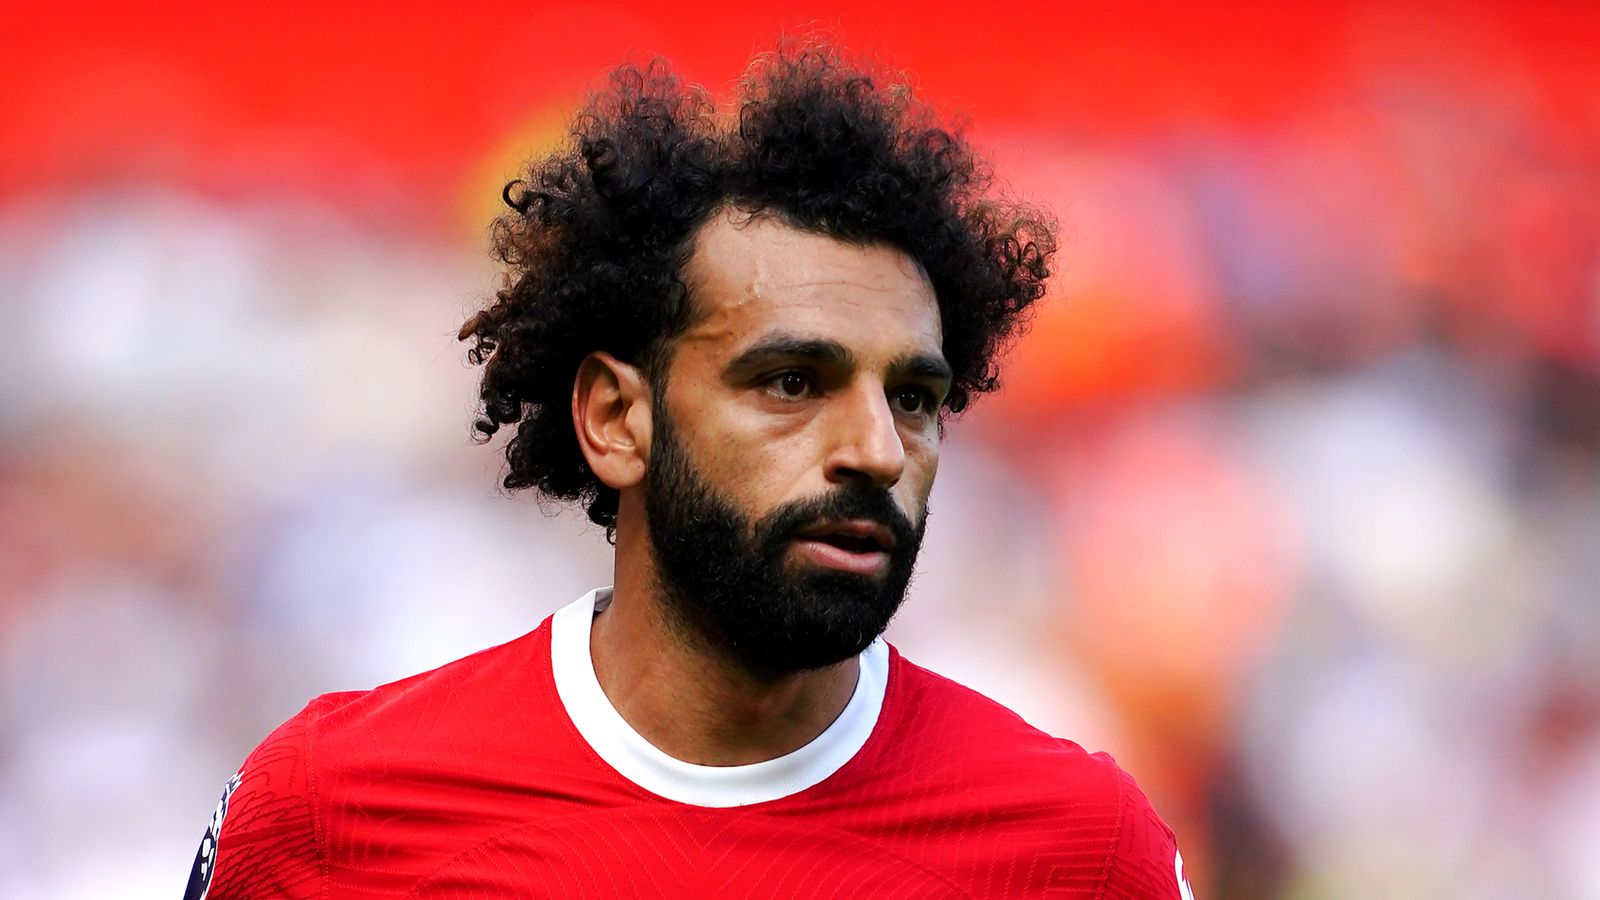 Mo Salah Liverpool forward calls on world leaders to come together